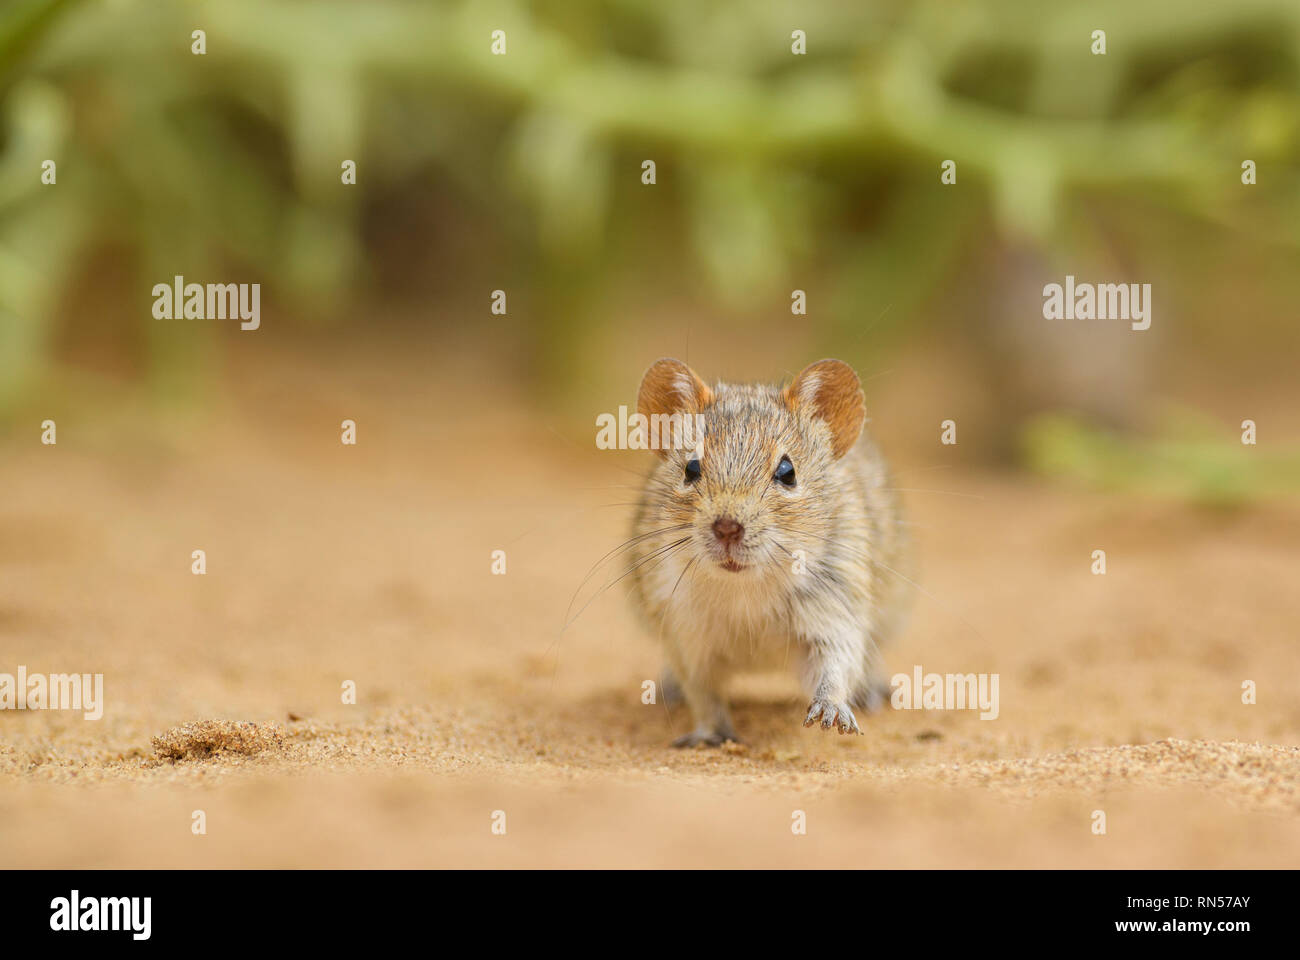 Four-striped Grass Mouse - Rhabdomys pumilio, beautiful small rodent from African bushes and deserts, Walvis Bay, Namib desert, Namibia. Stock Photo